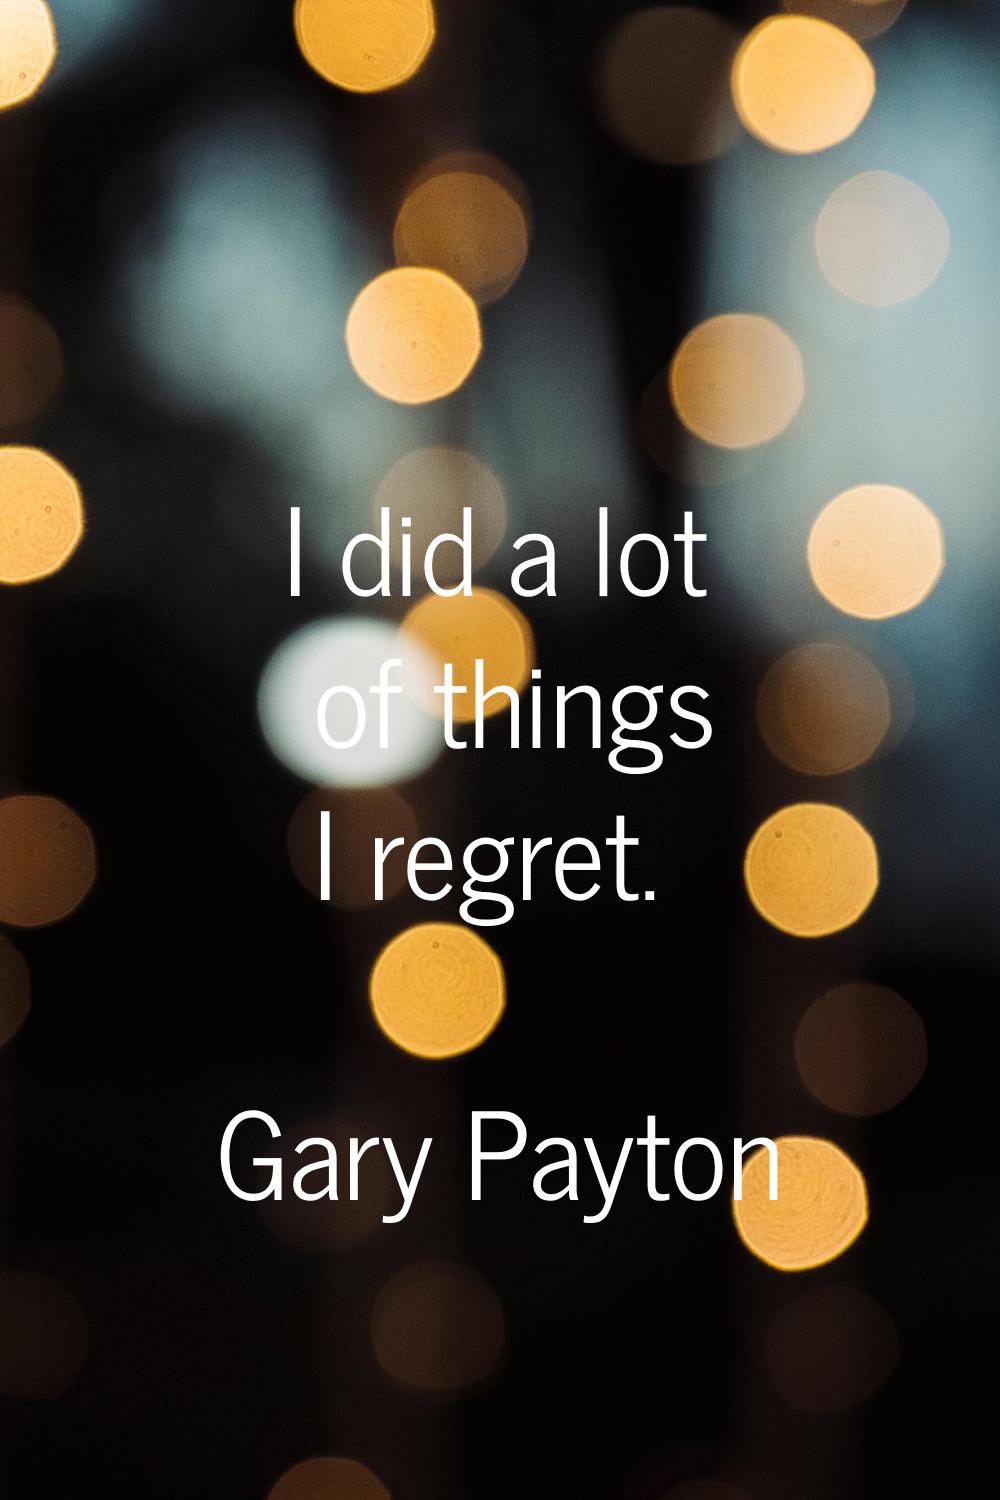 I did a lot of things I regret.